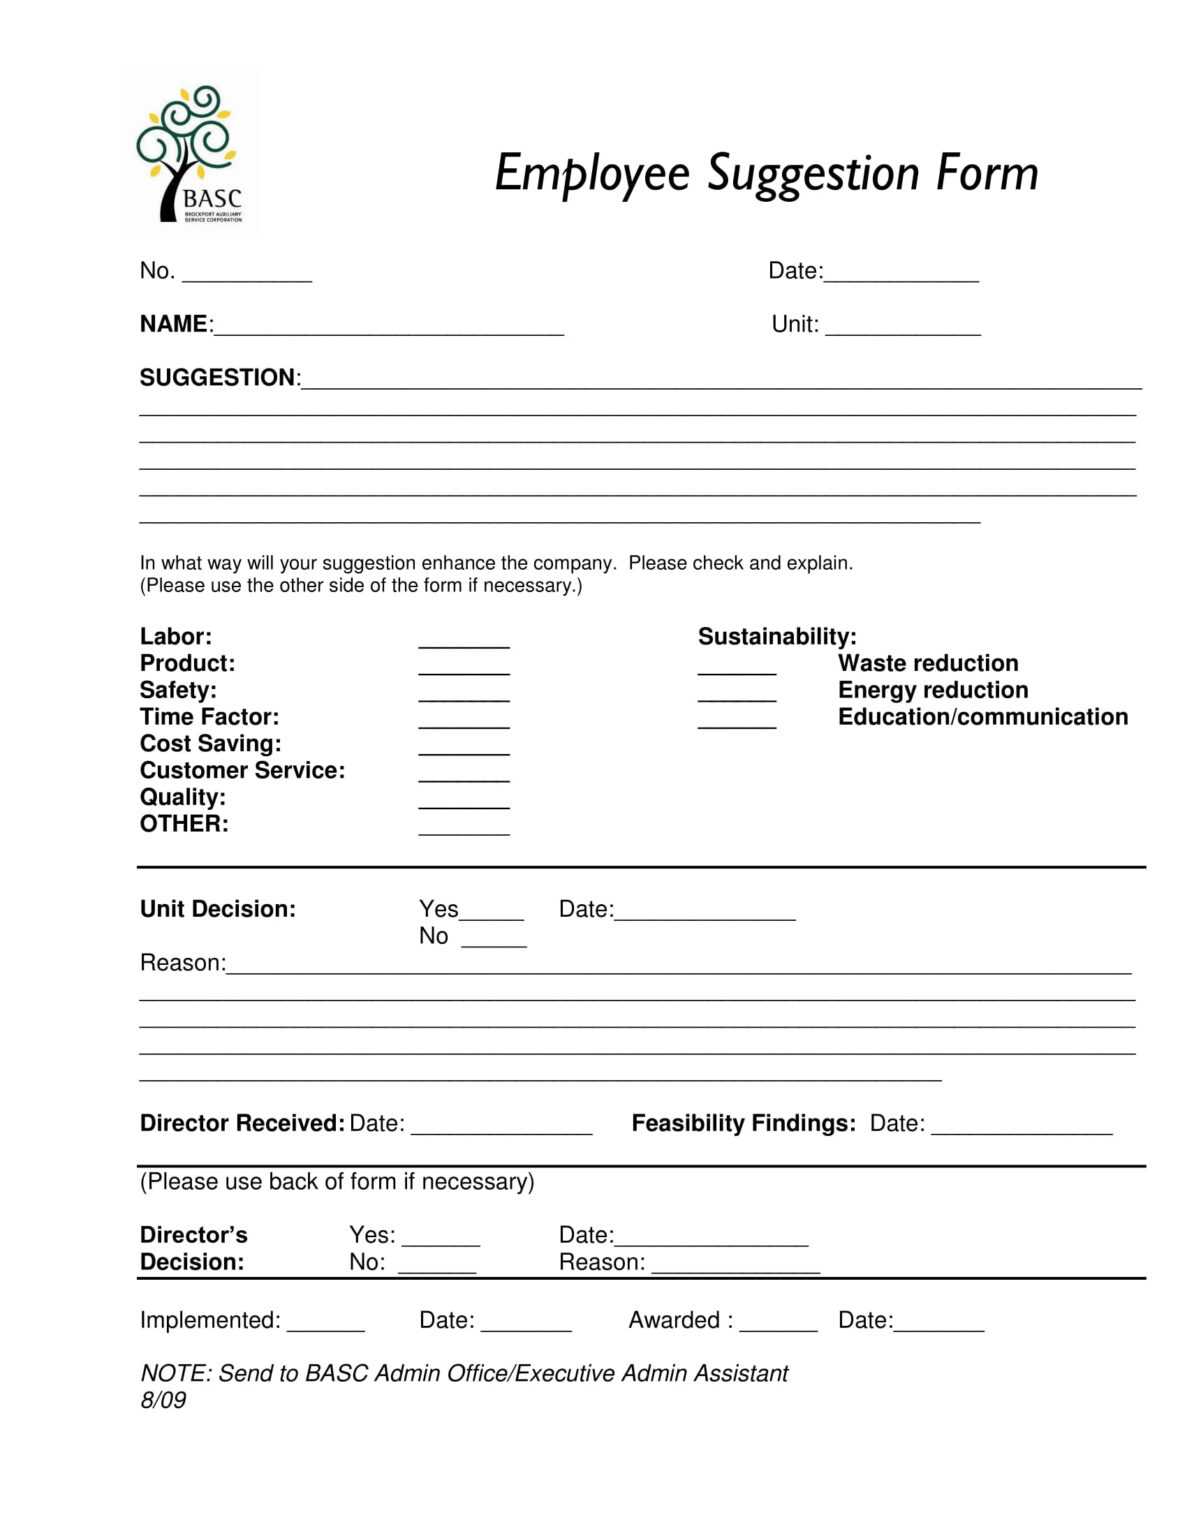 employee-suggestion-form-template-free-download-printable-templates